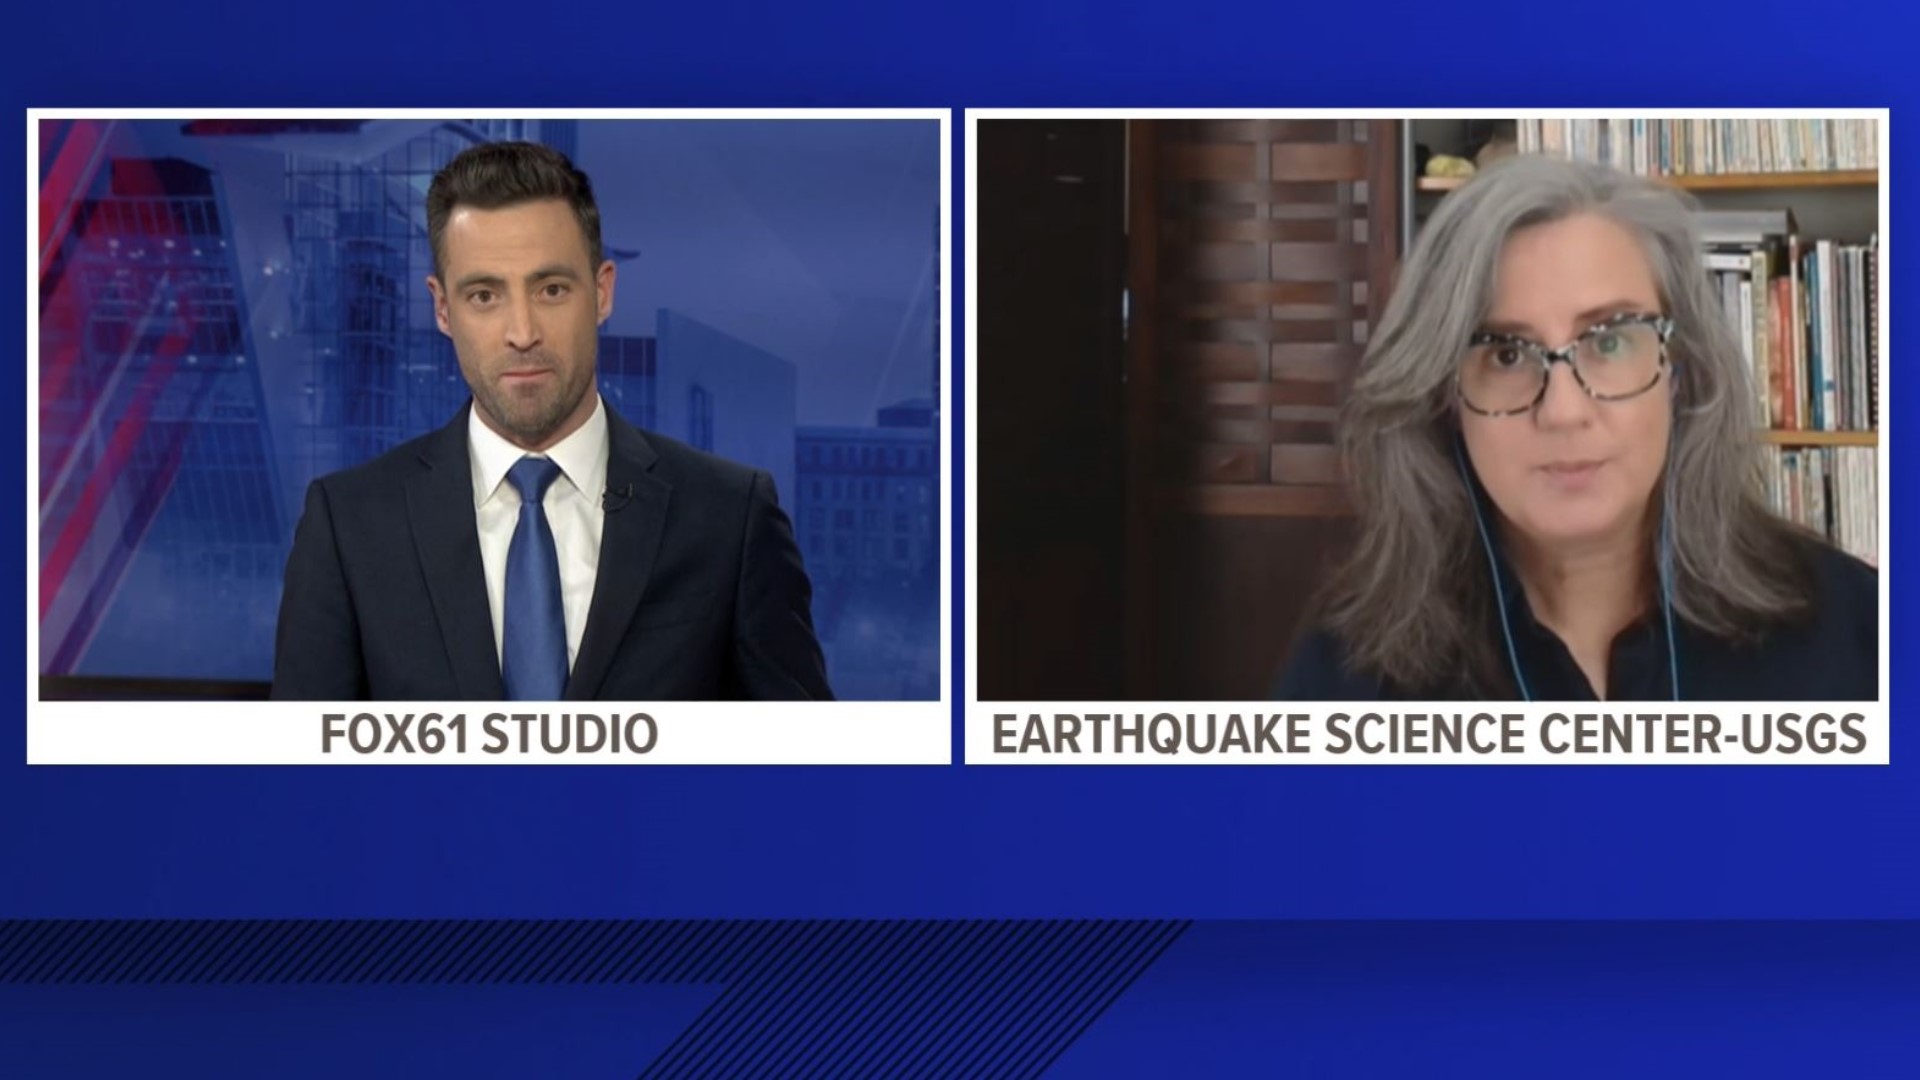 Christine Goulet, Ph.D., Dir. of the Earthquake Science Center for the U.S. Geological Survey explains what earthquakes are and how Conn. was impacted by one in N.J.